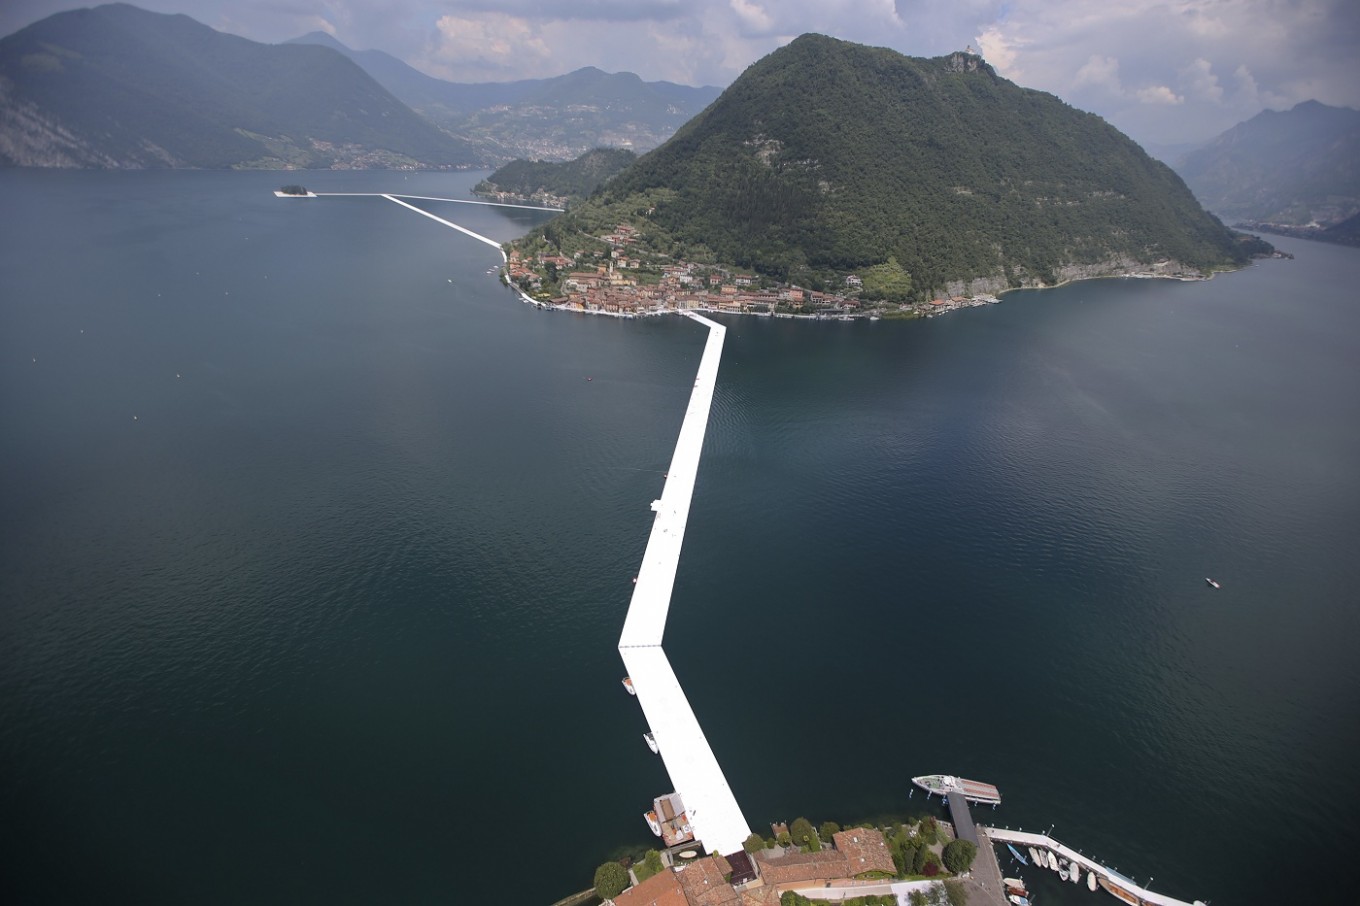 Artist Christo Walks On Water With Floating Piers Destinations The Jakarta Post